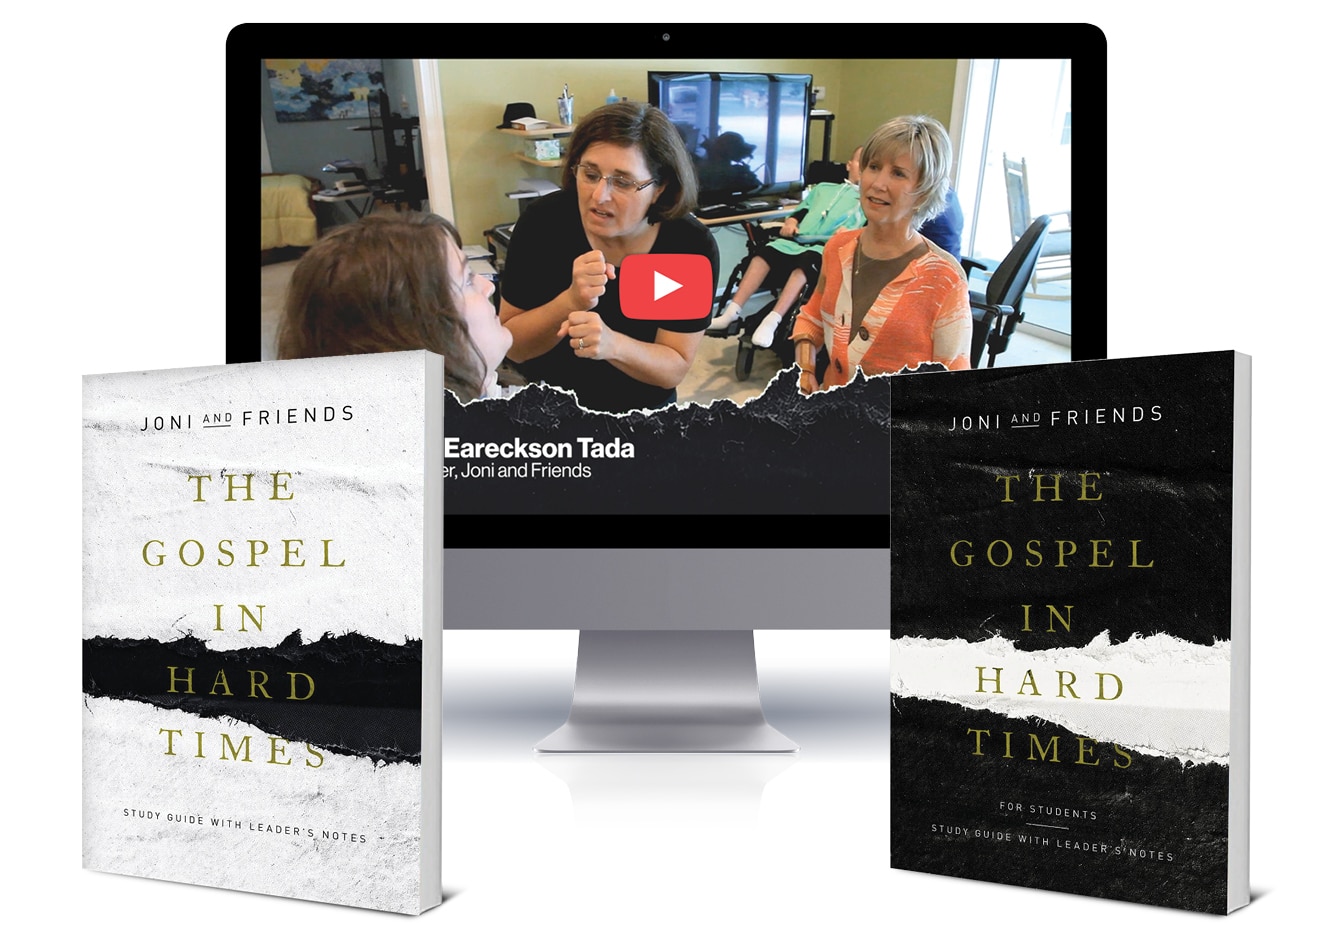 The Gospel in Hard Times Books and video